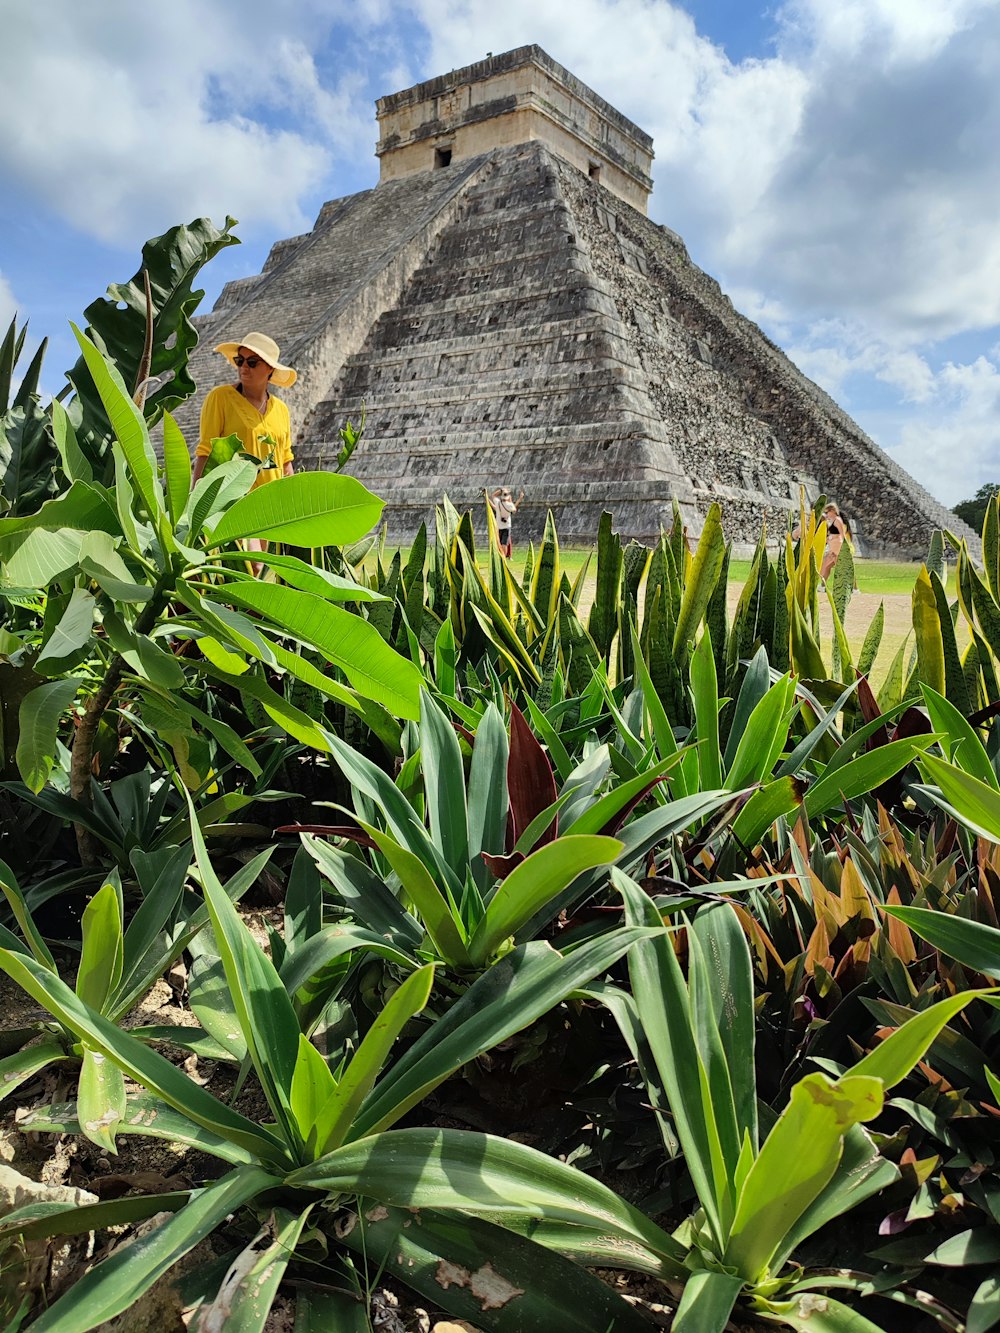 a person standing in a field of plants with a stone building in the background